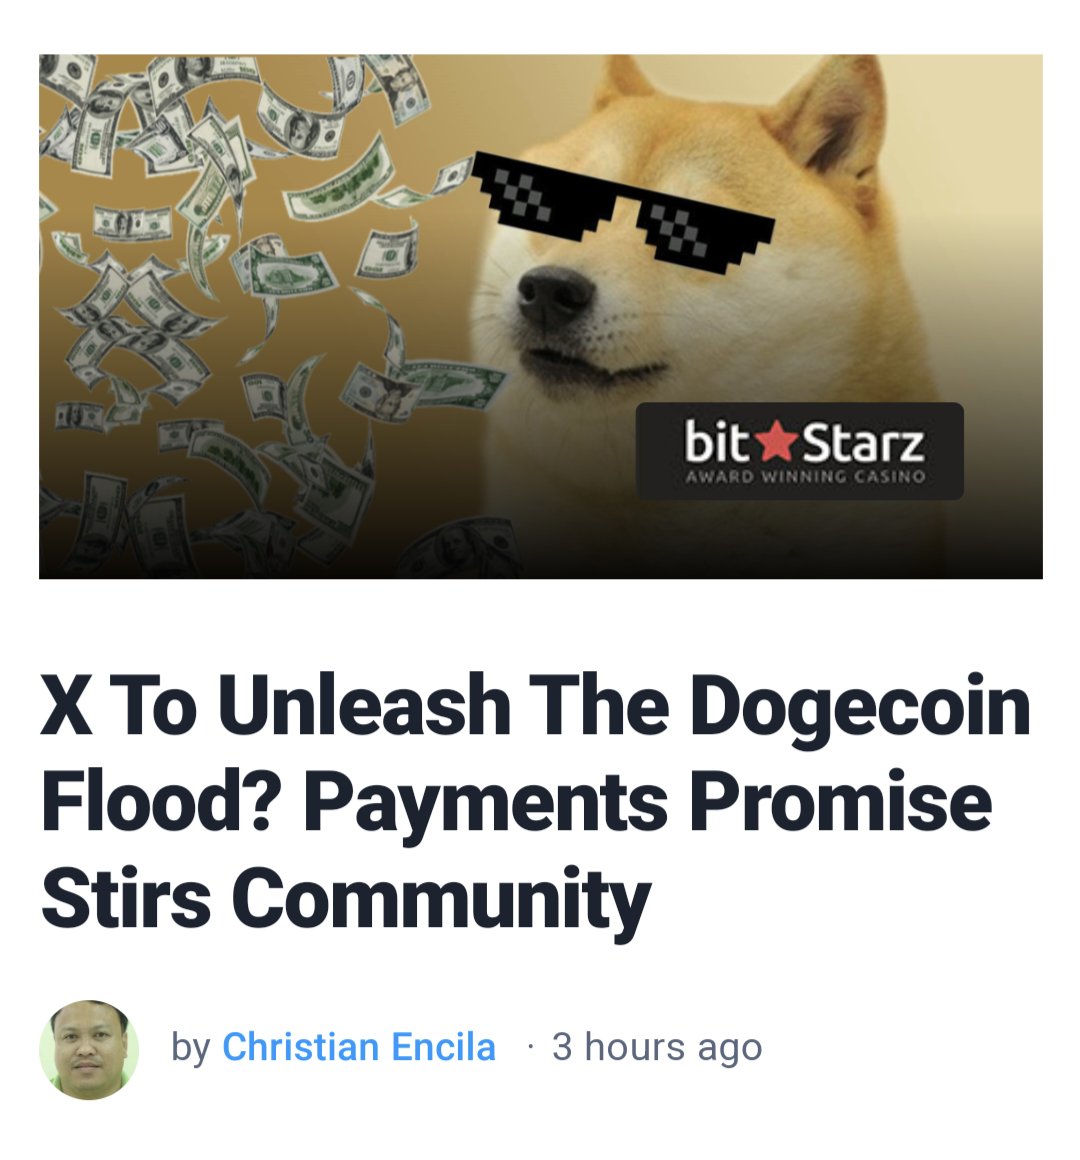 The kind of flood that will nourish the community #doge